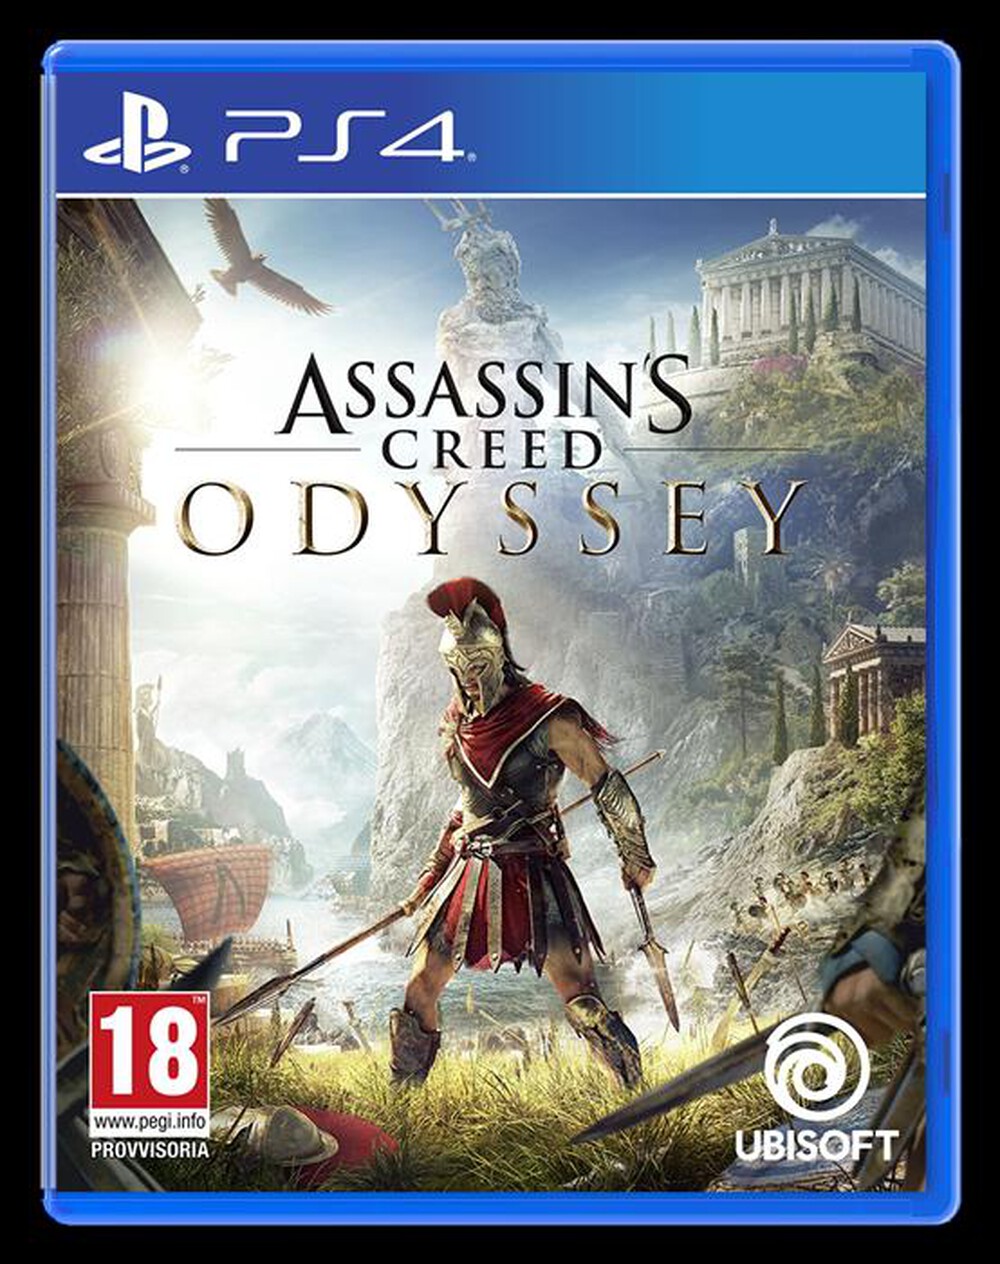 "UBISOFT - ASSASSIN'S CREED ODYSSEY  PS4 - "